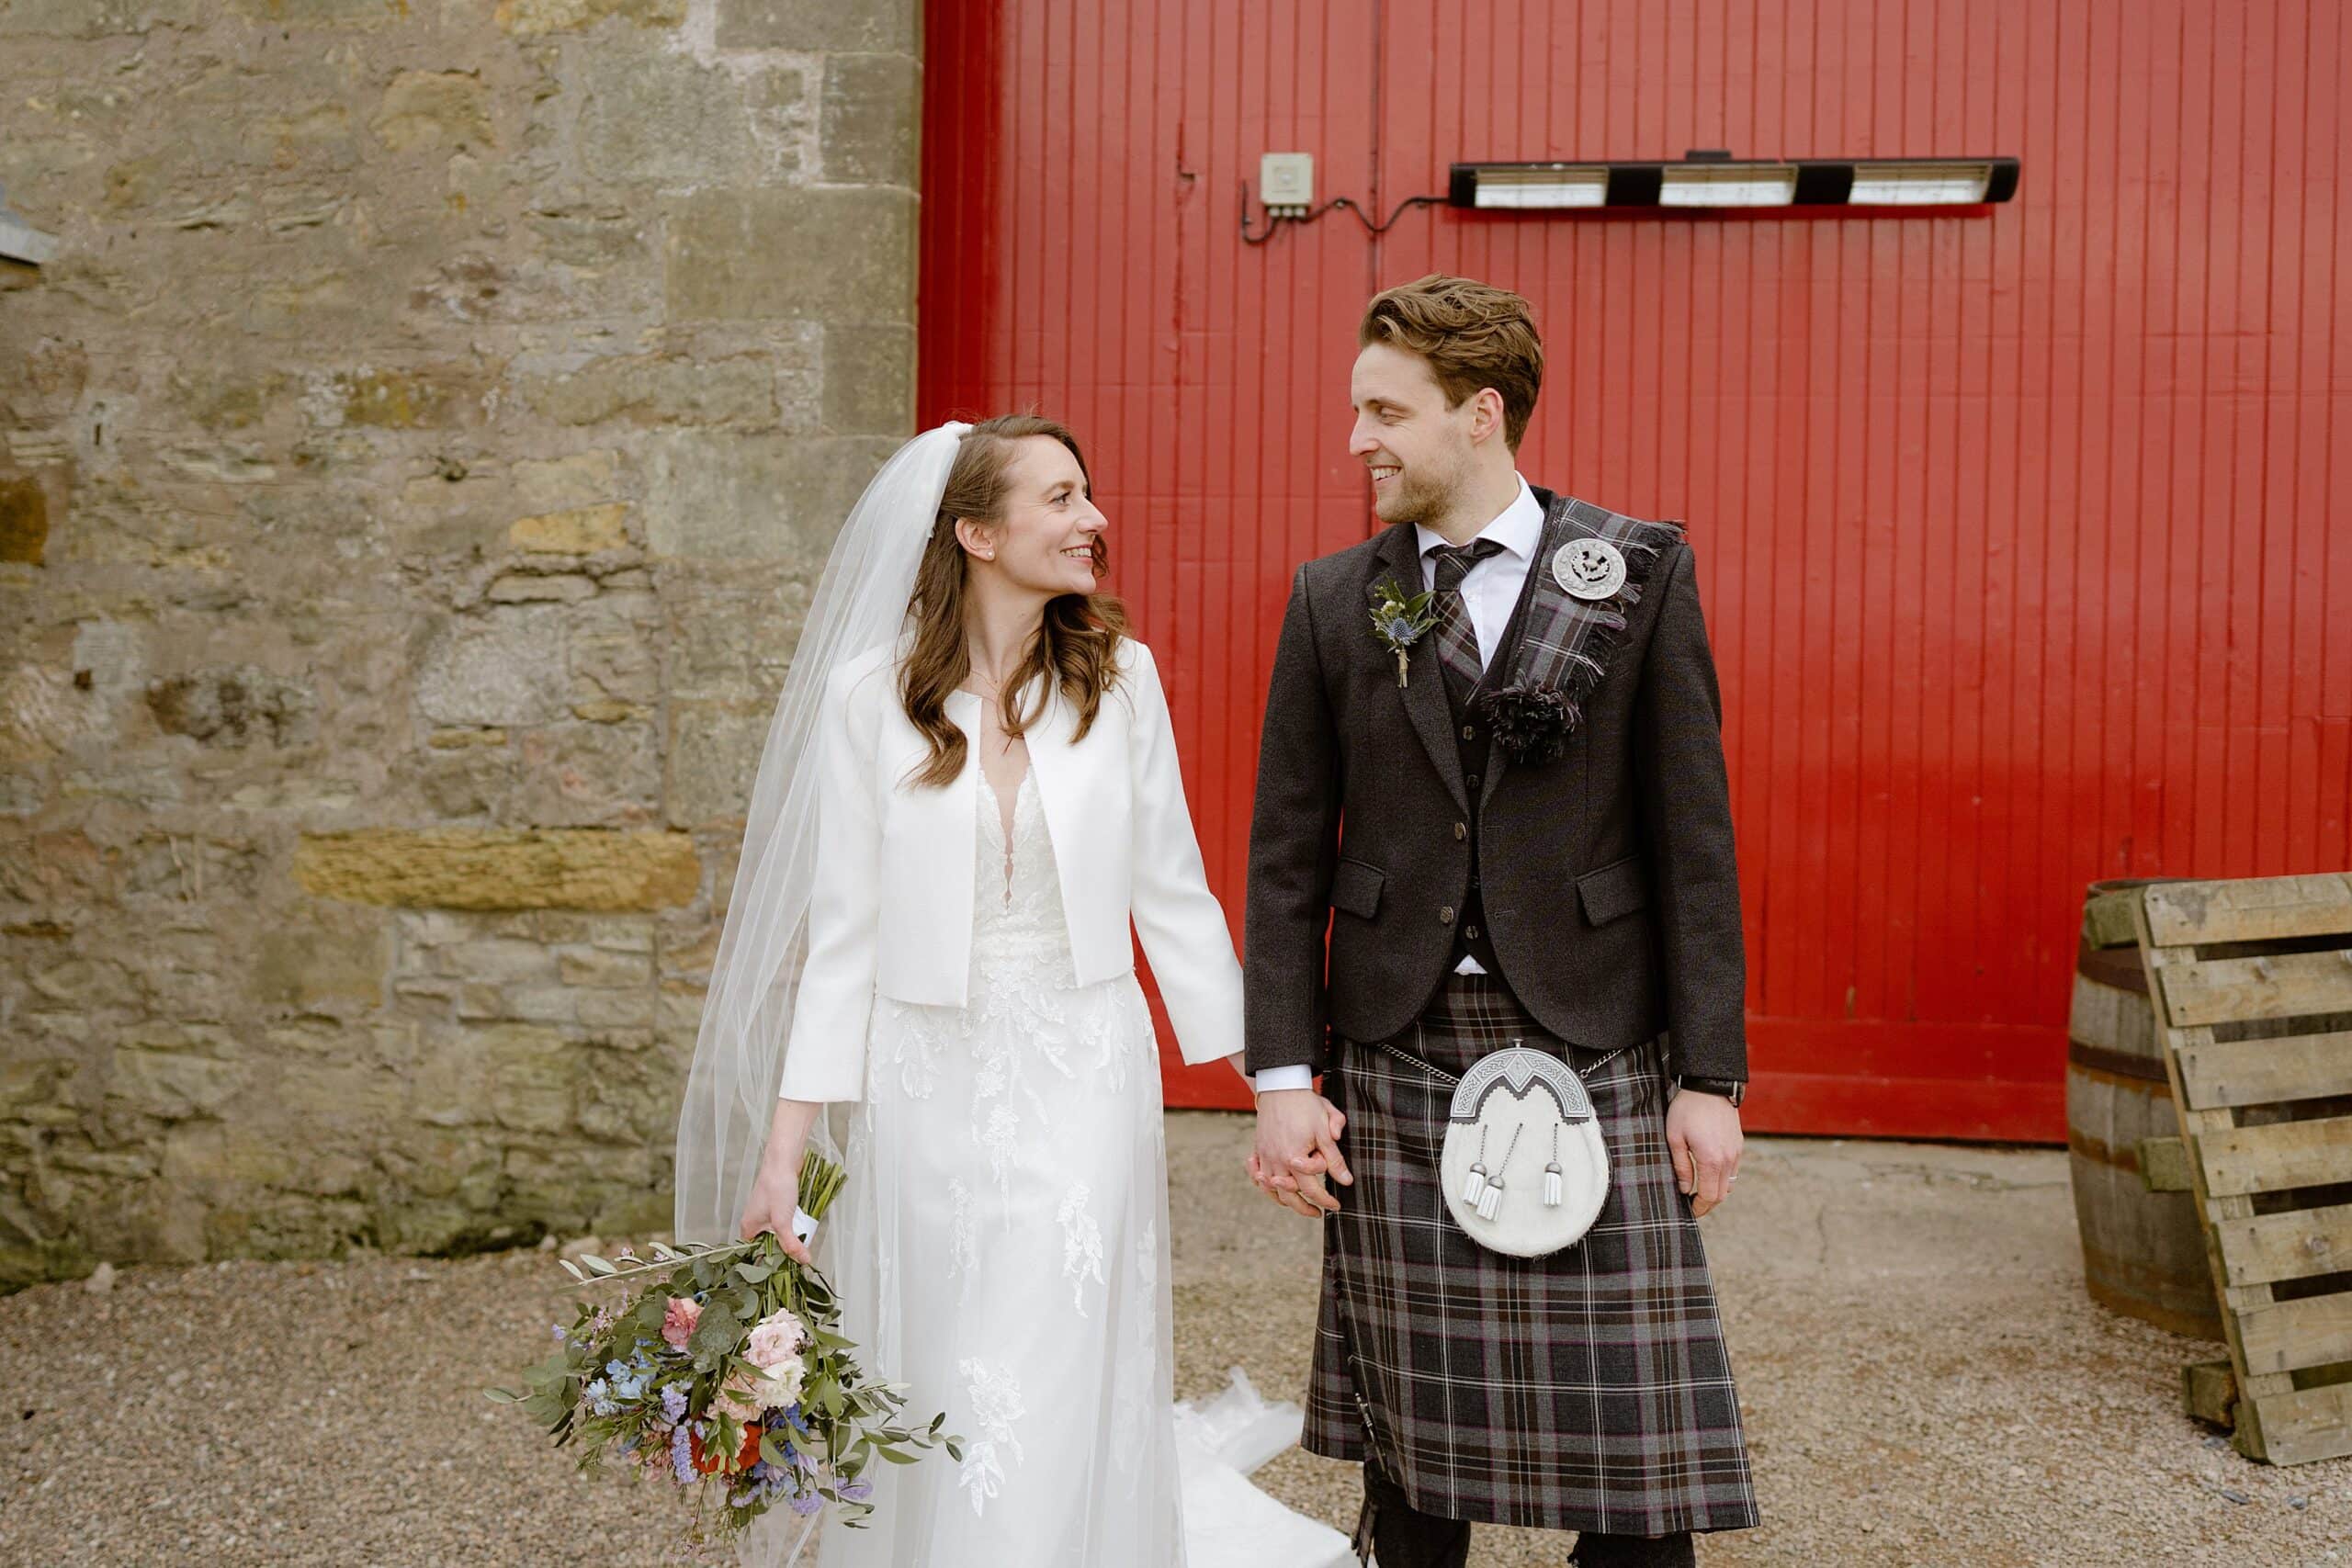 the bride and groom smile and hold hands in front of a red barn door outside their unique barn wedding venue in scotland captured by st andrews wedding photographer